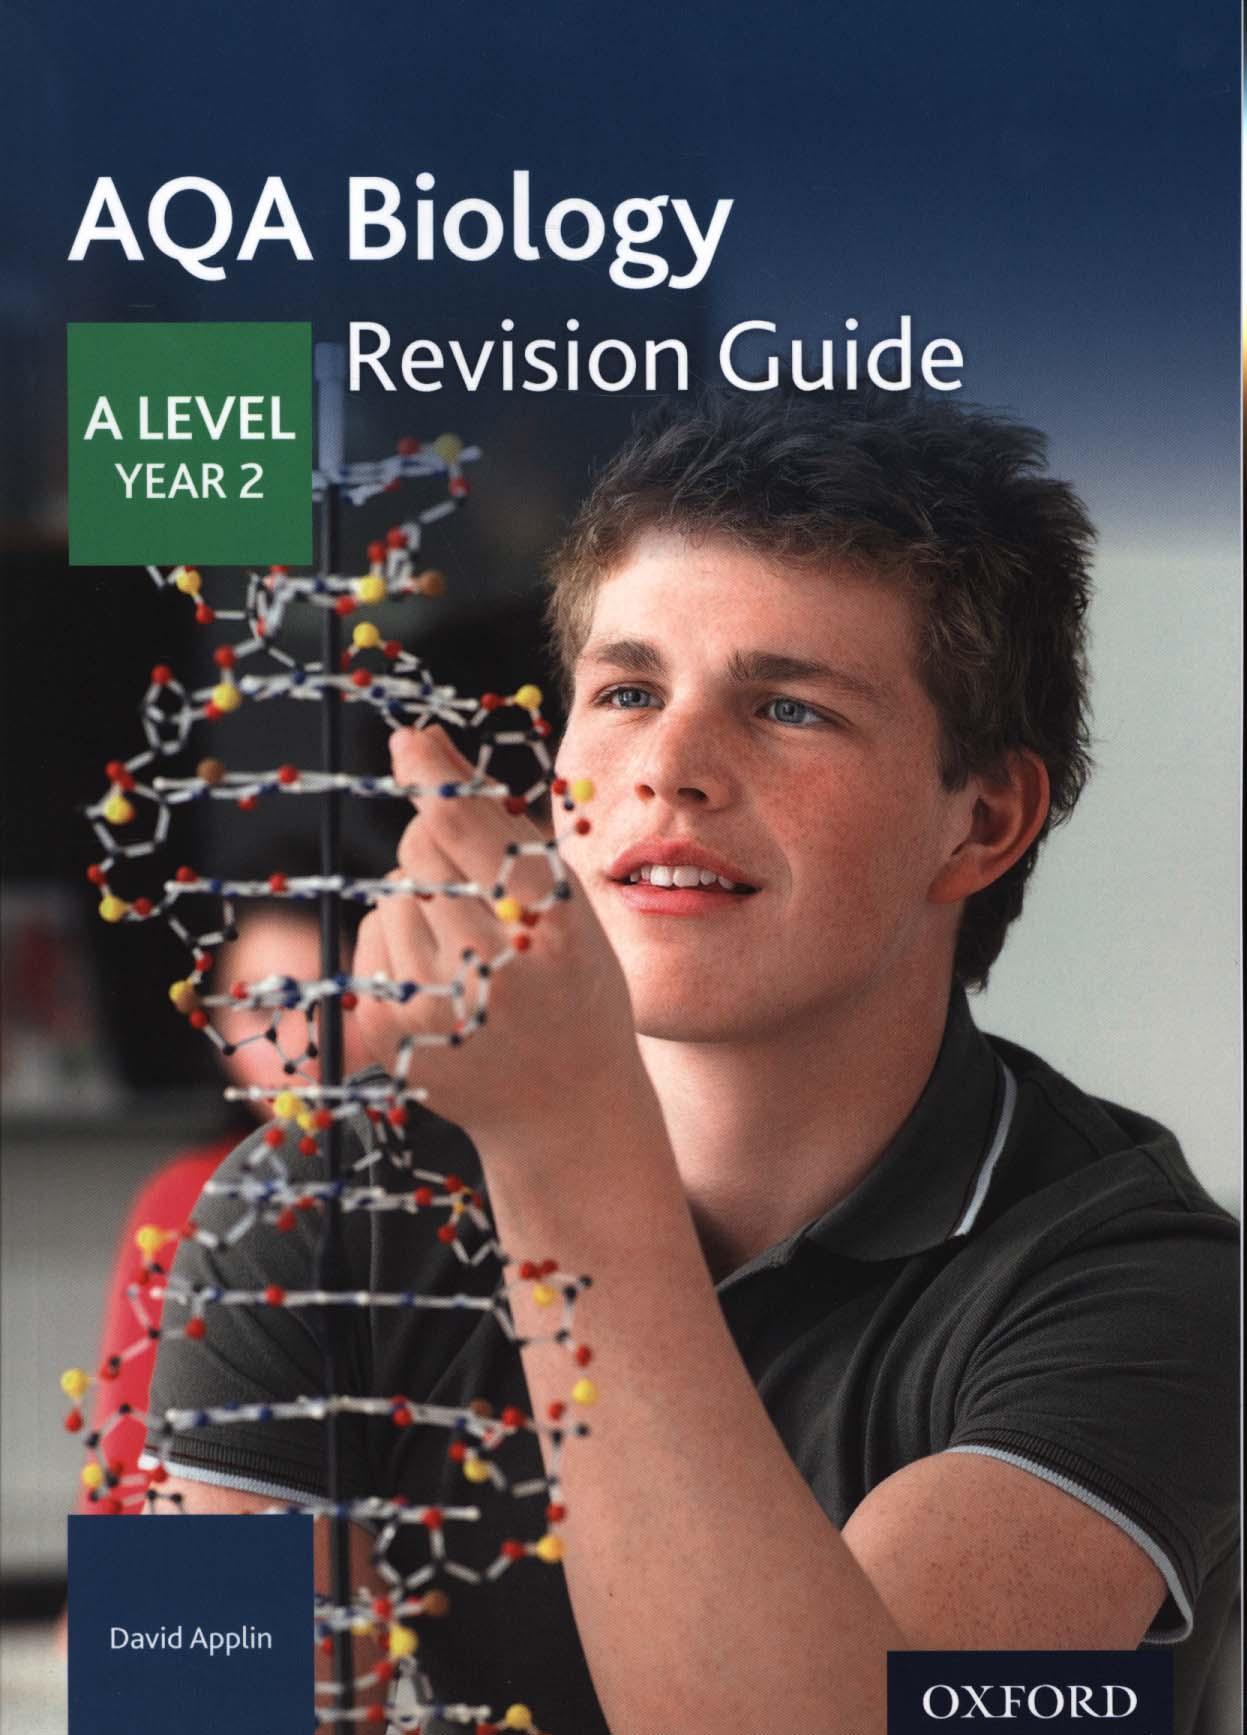 AQA A Level Biology Year 2 Revision Guide